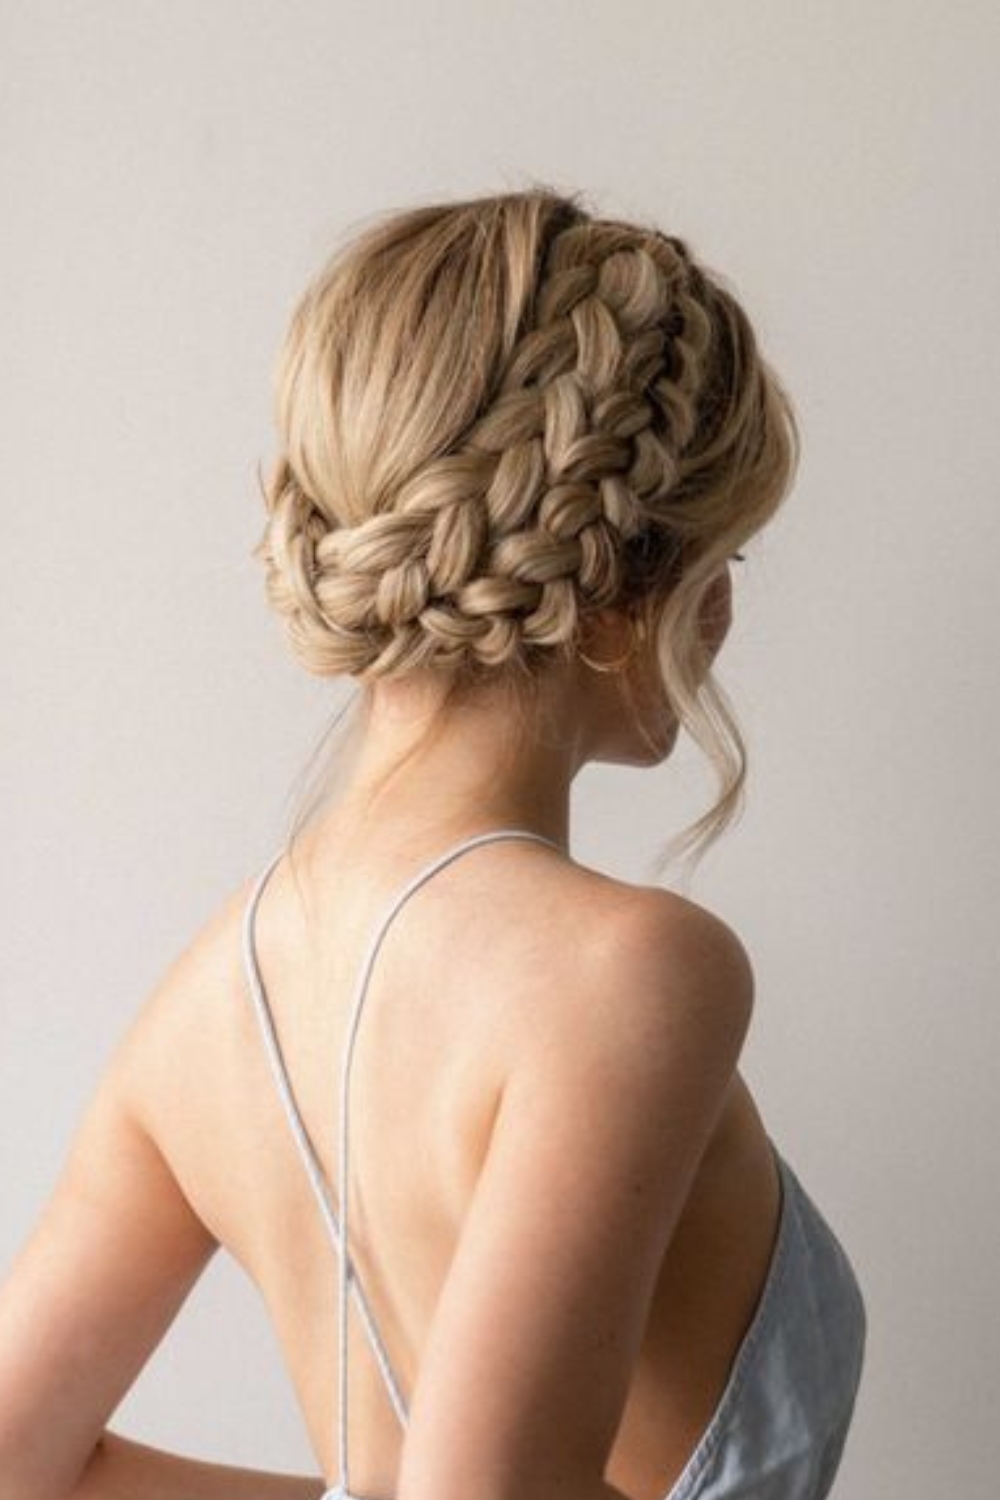 Crown braid Hairstyle for Music Festival